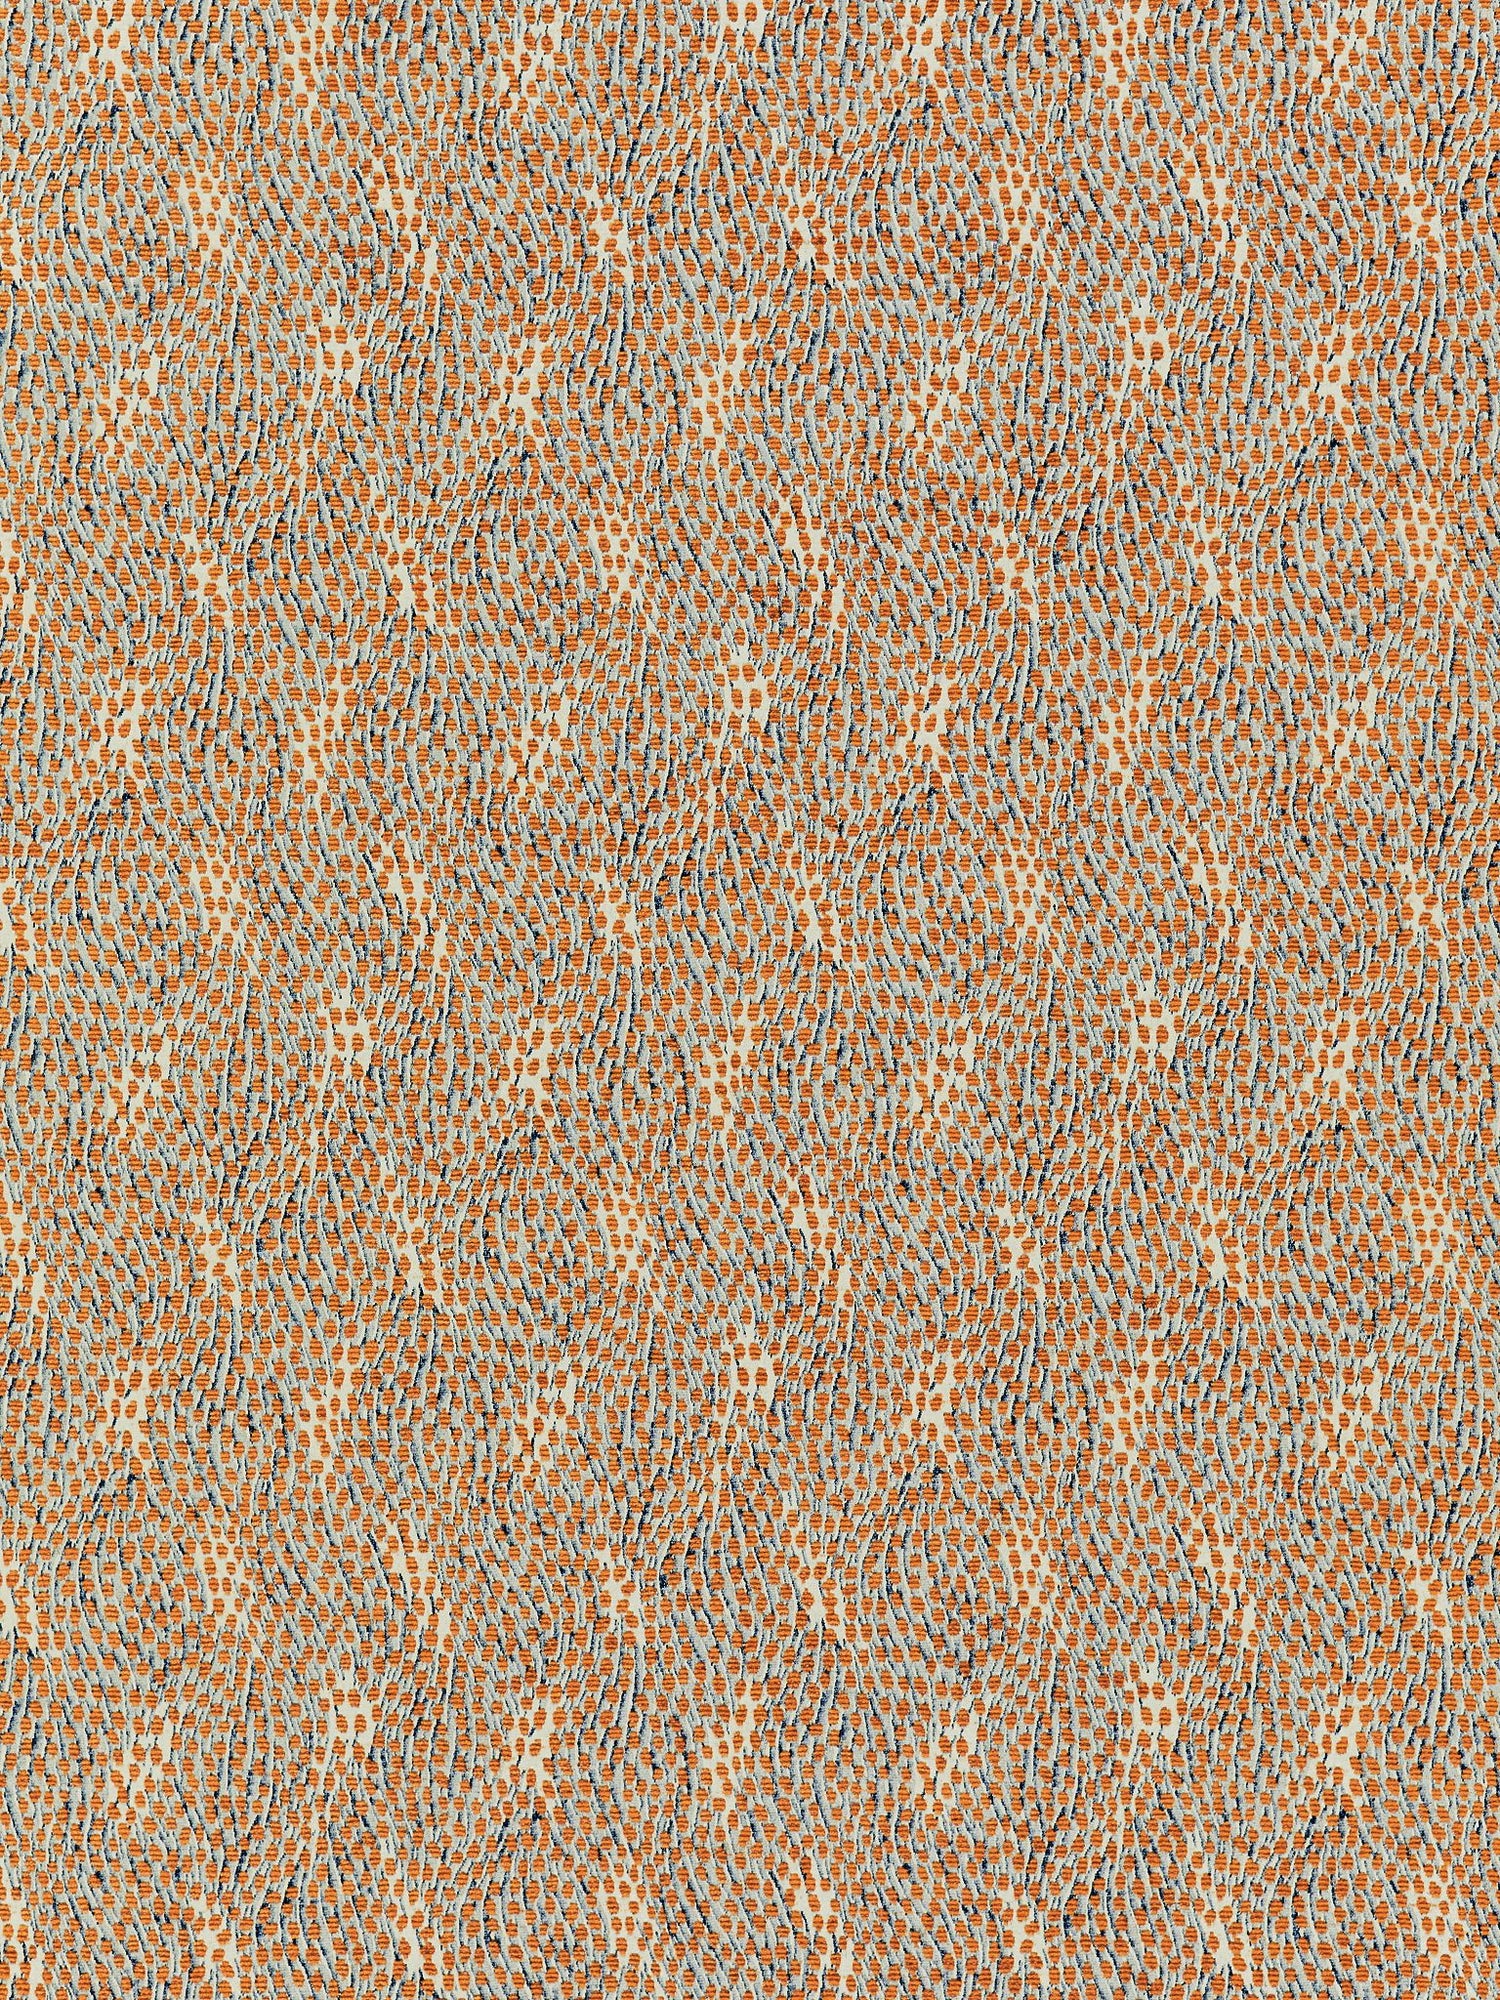 Flurry fabric in fox color - pattern number BI 00051234 - by Scalamandre in the Old World Weavers collection